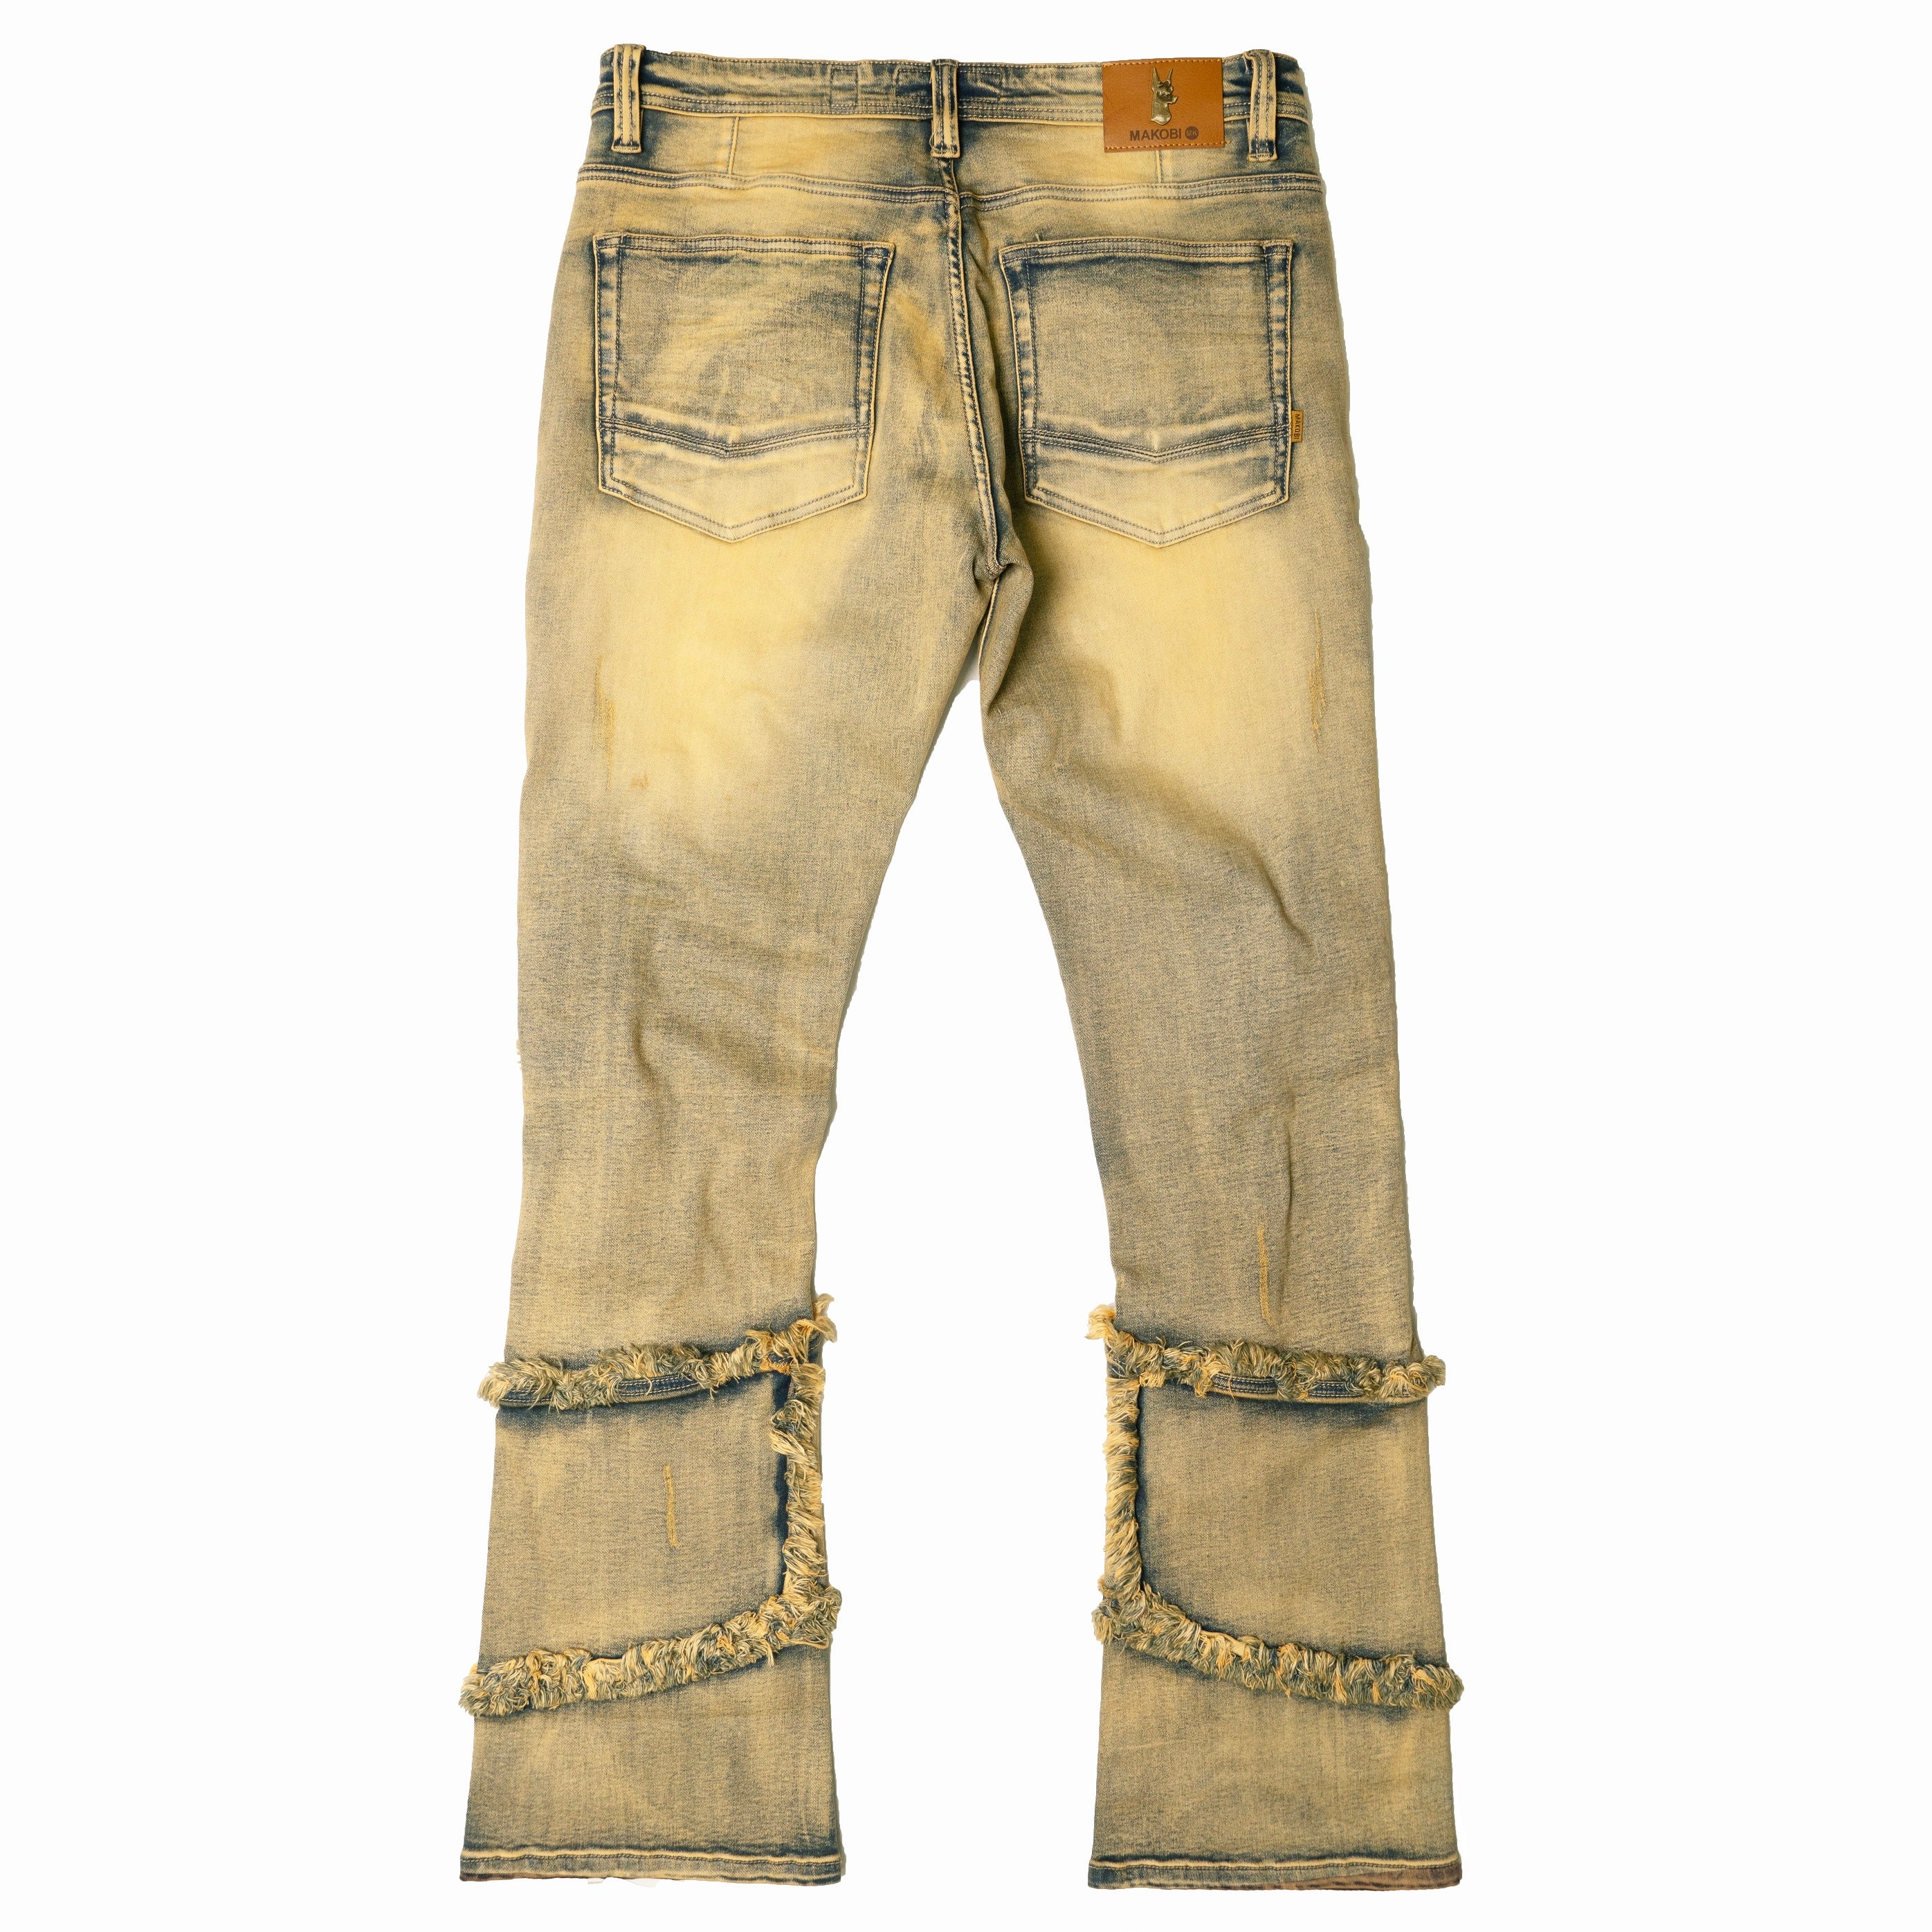 M1997 Gianos  Semi Stacked Jeans - Antique